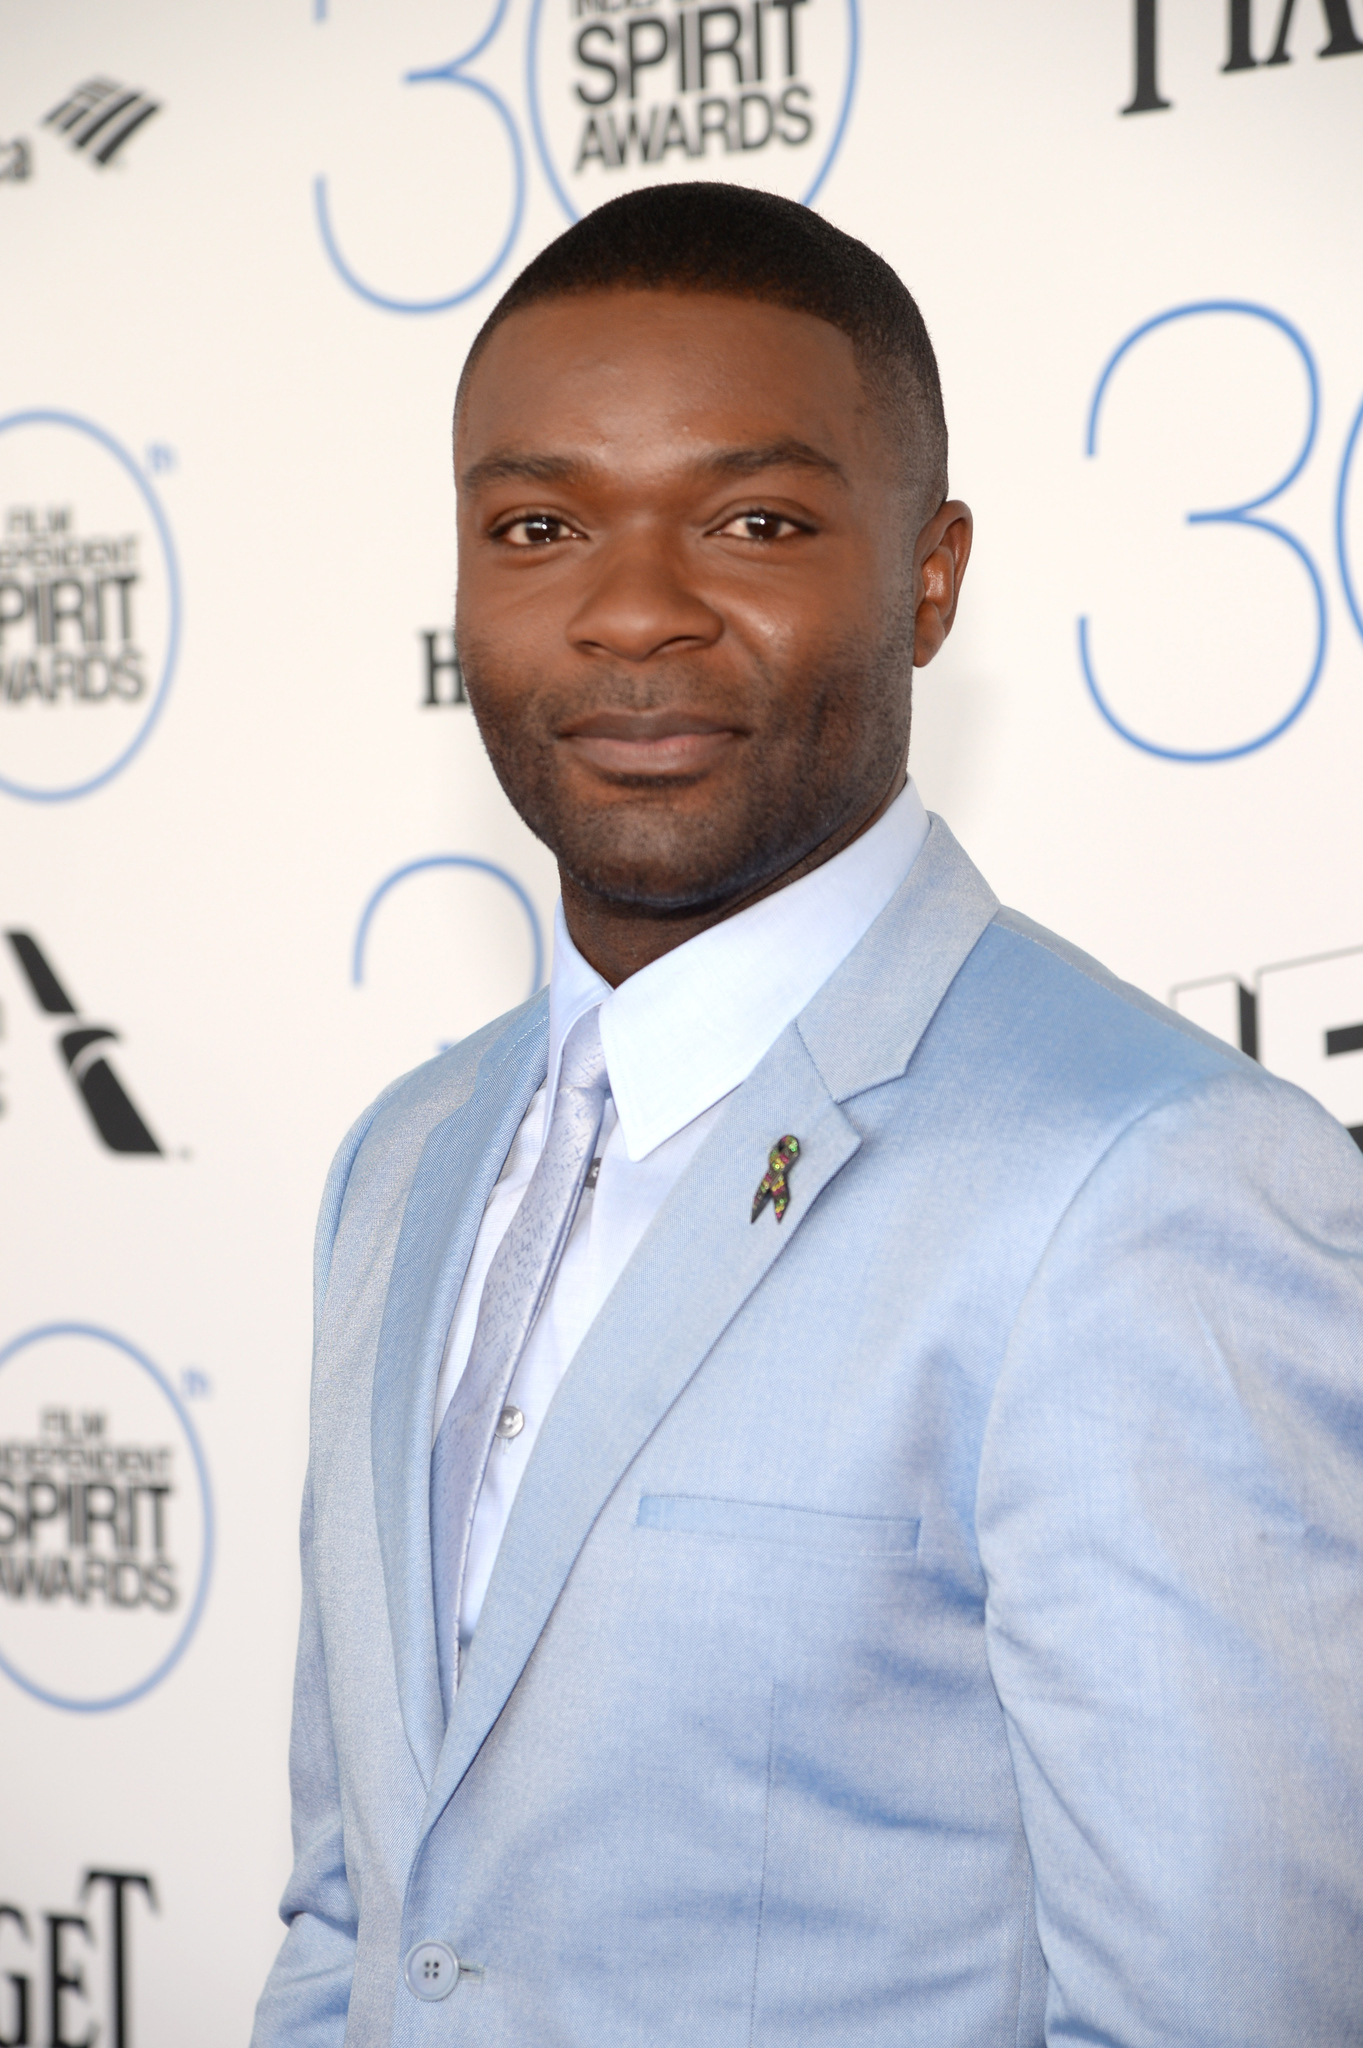 David Oyelowo at event of 30th Annual Film Independent Spirit Awards (2015)